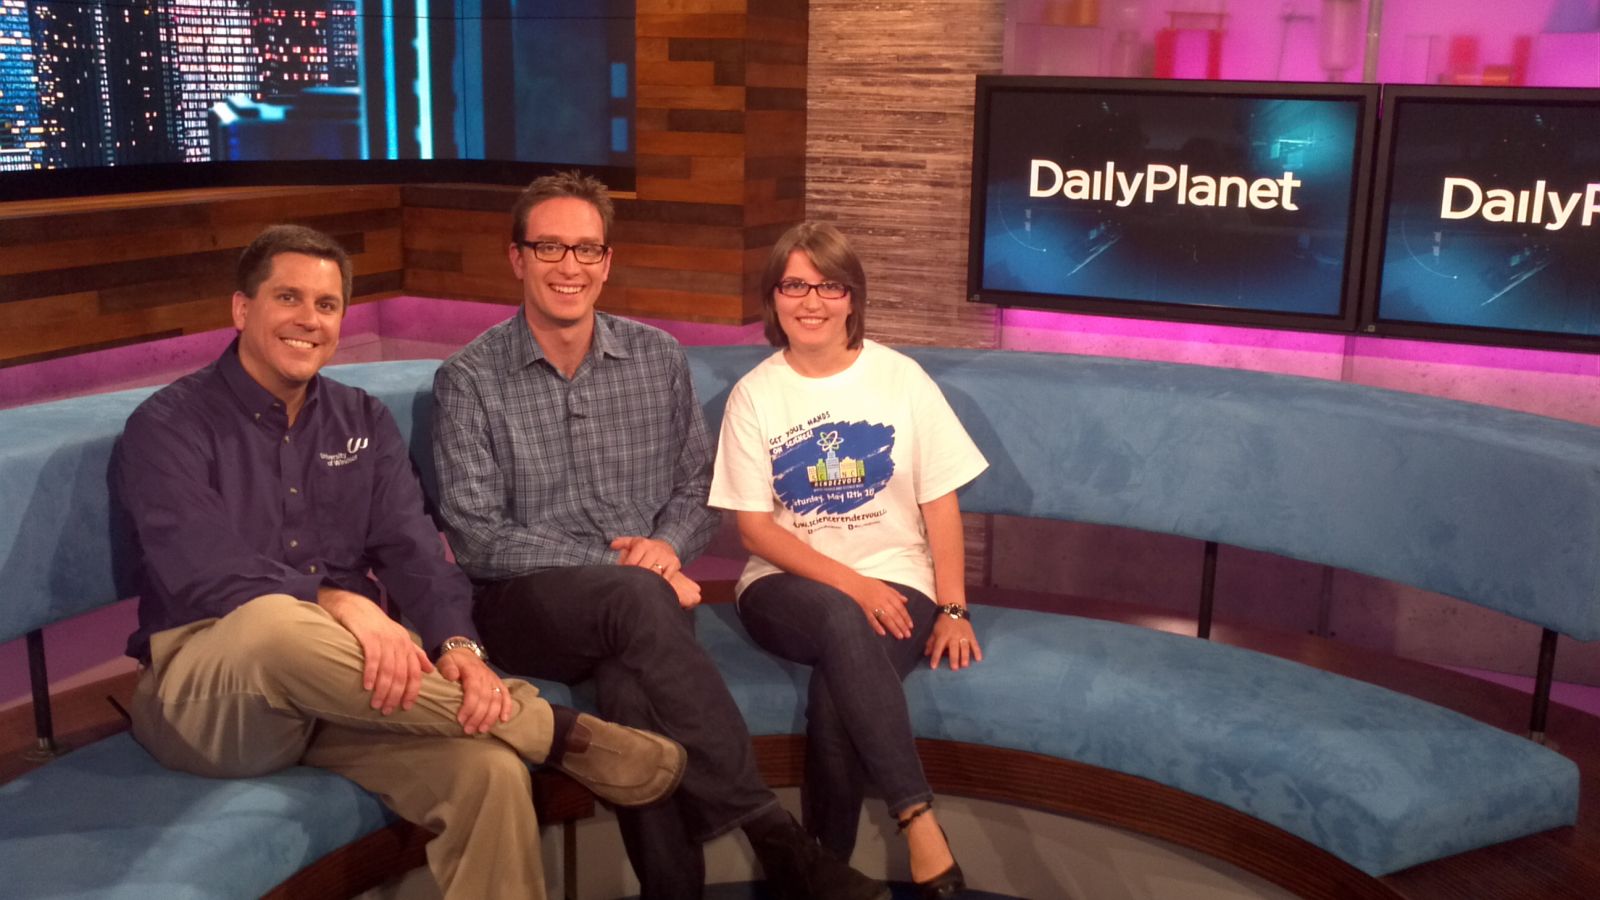 Professor Rehse, biotechnology student Florida Doci and Dan Riskin on the set of Discovery Channel’s Daily Planet